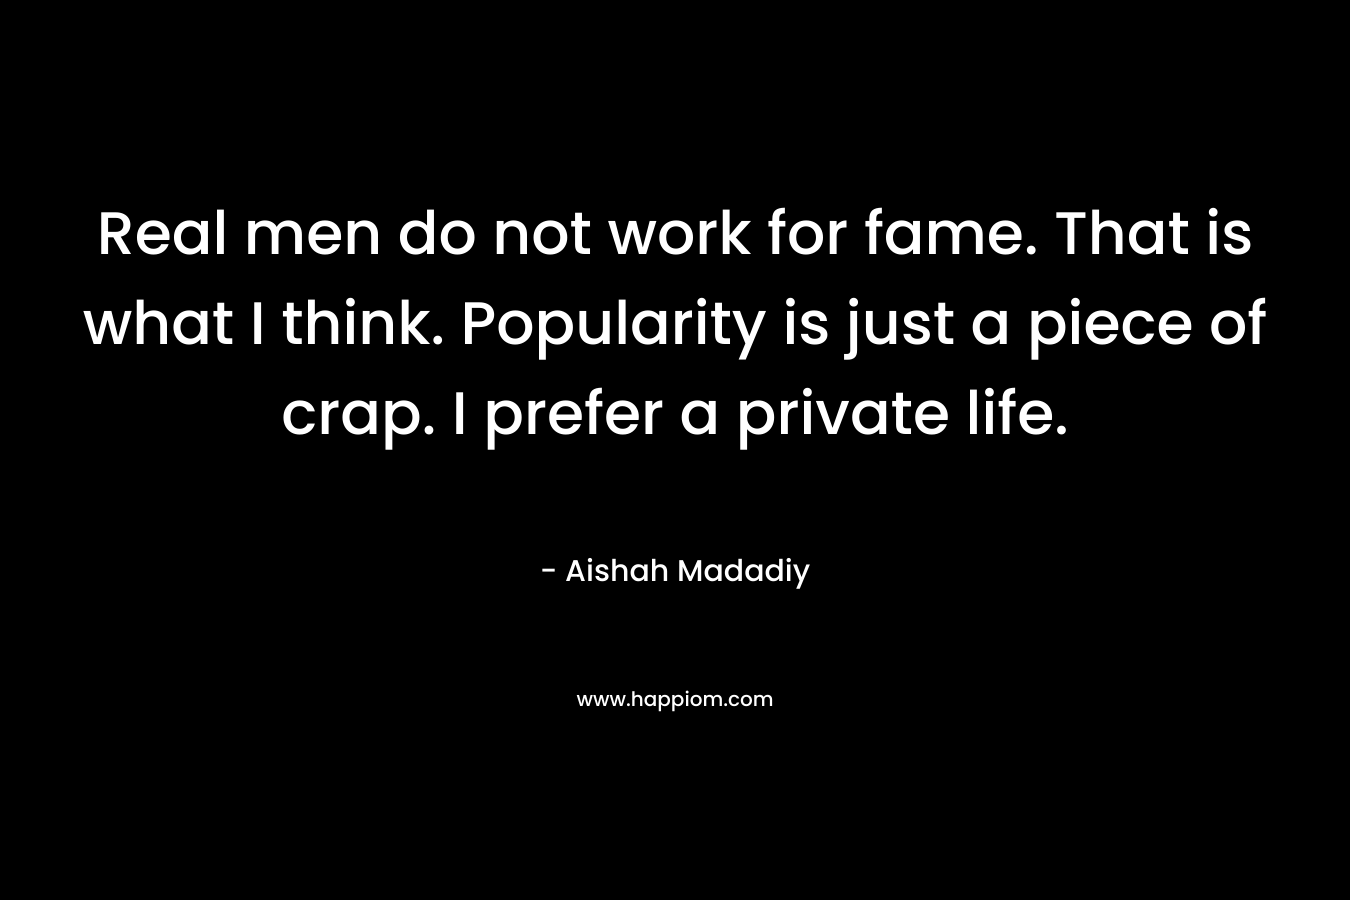 Real men do not work for fame. That is what I think. Popularity is just a piece of crap. I prefer a private life.